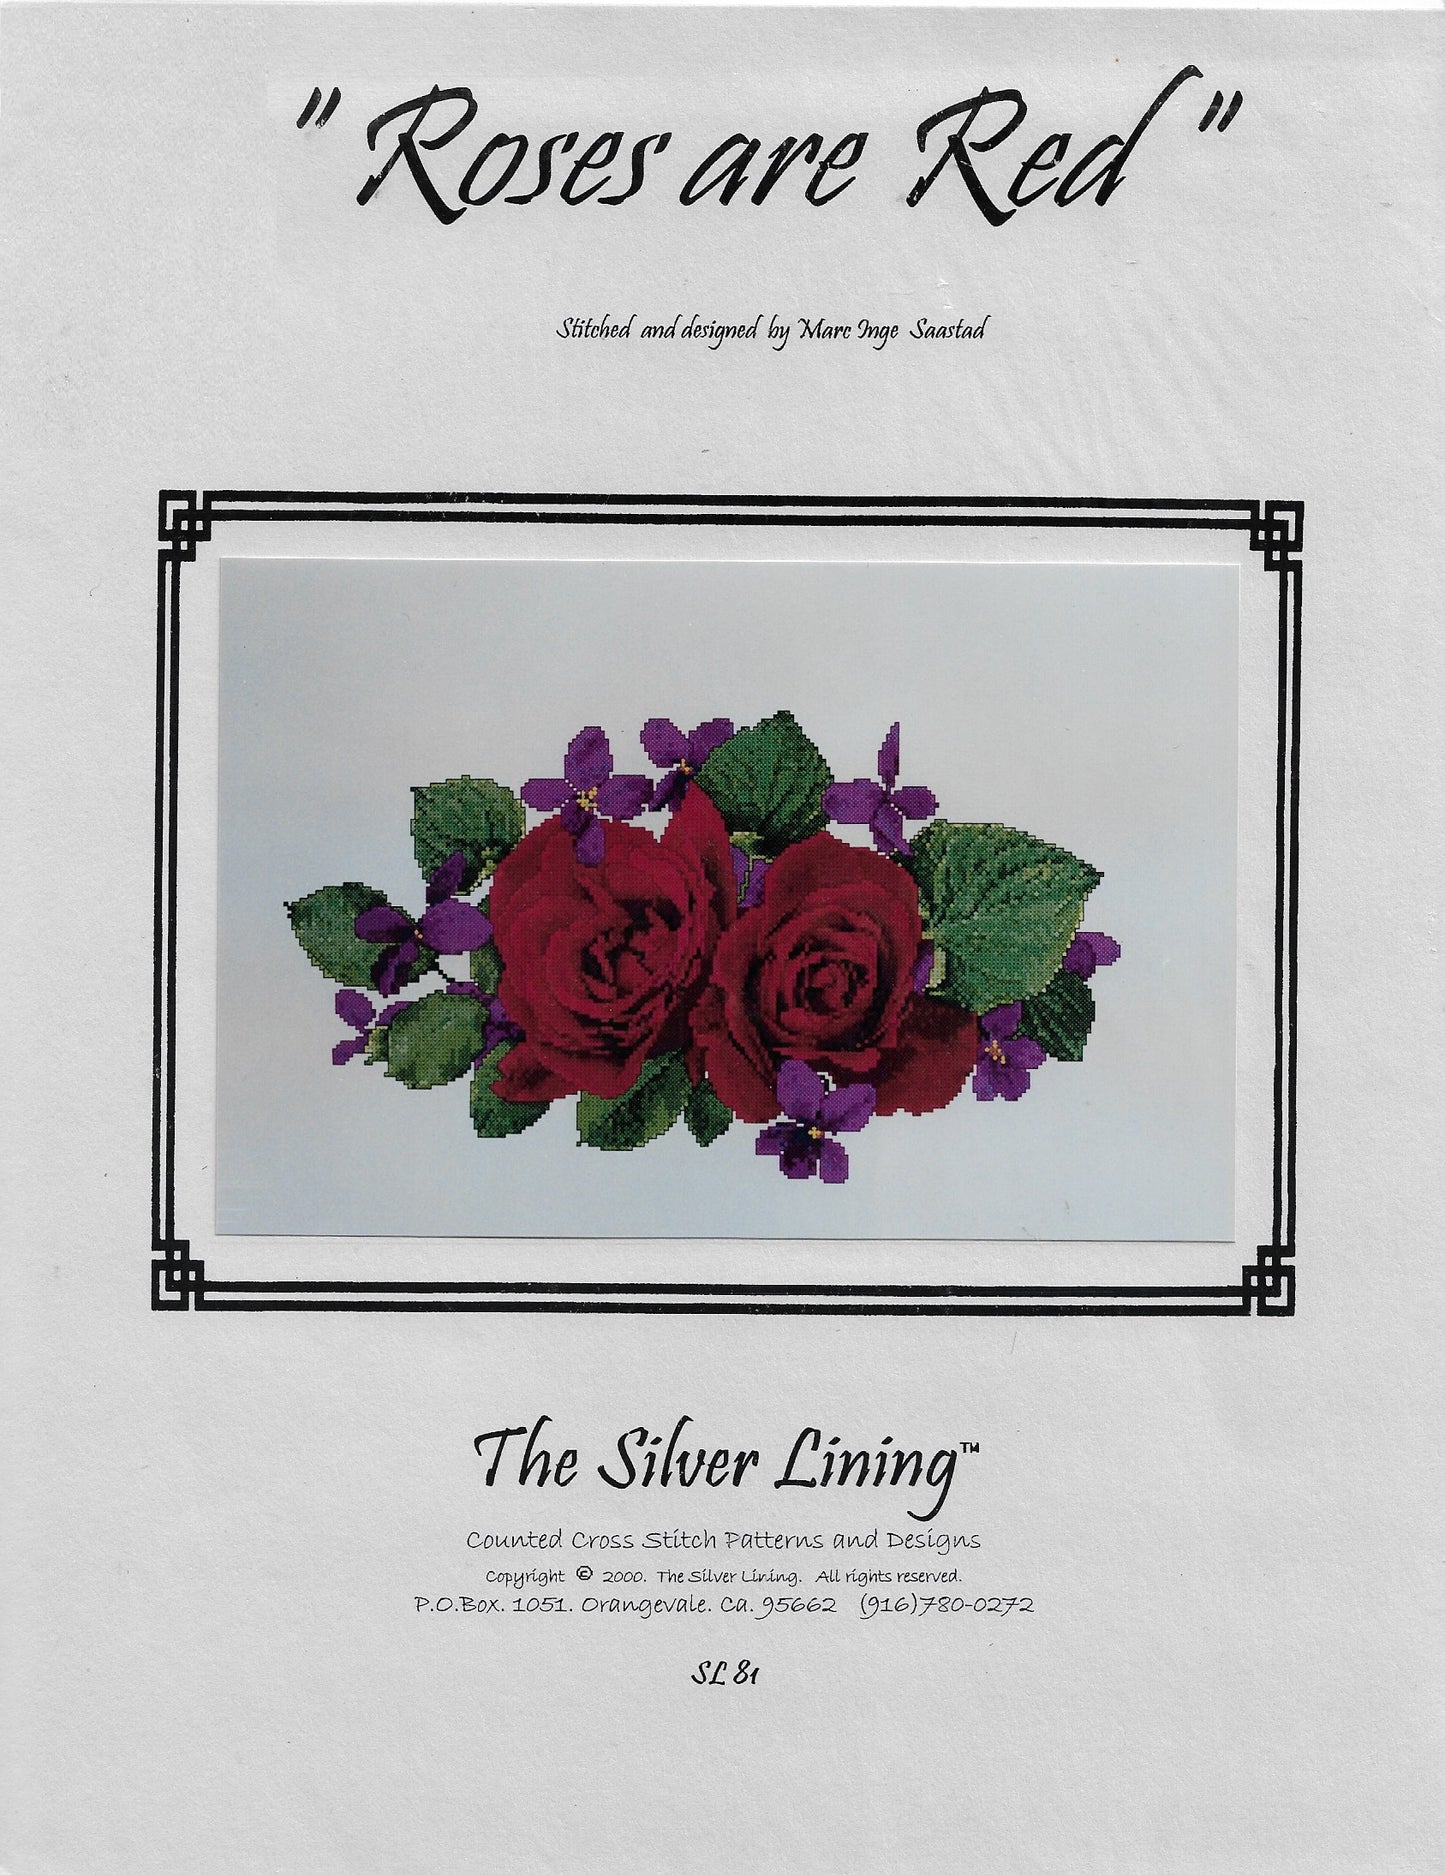 Silver Lining Roses Are red SL81 rose cross stitch pattern